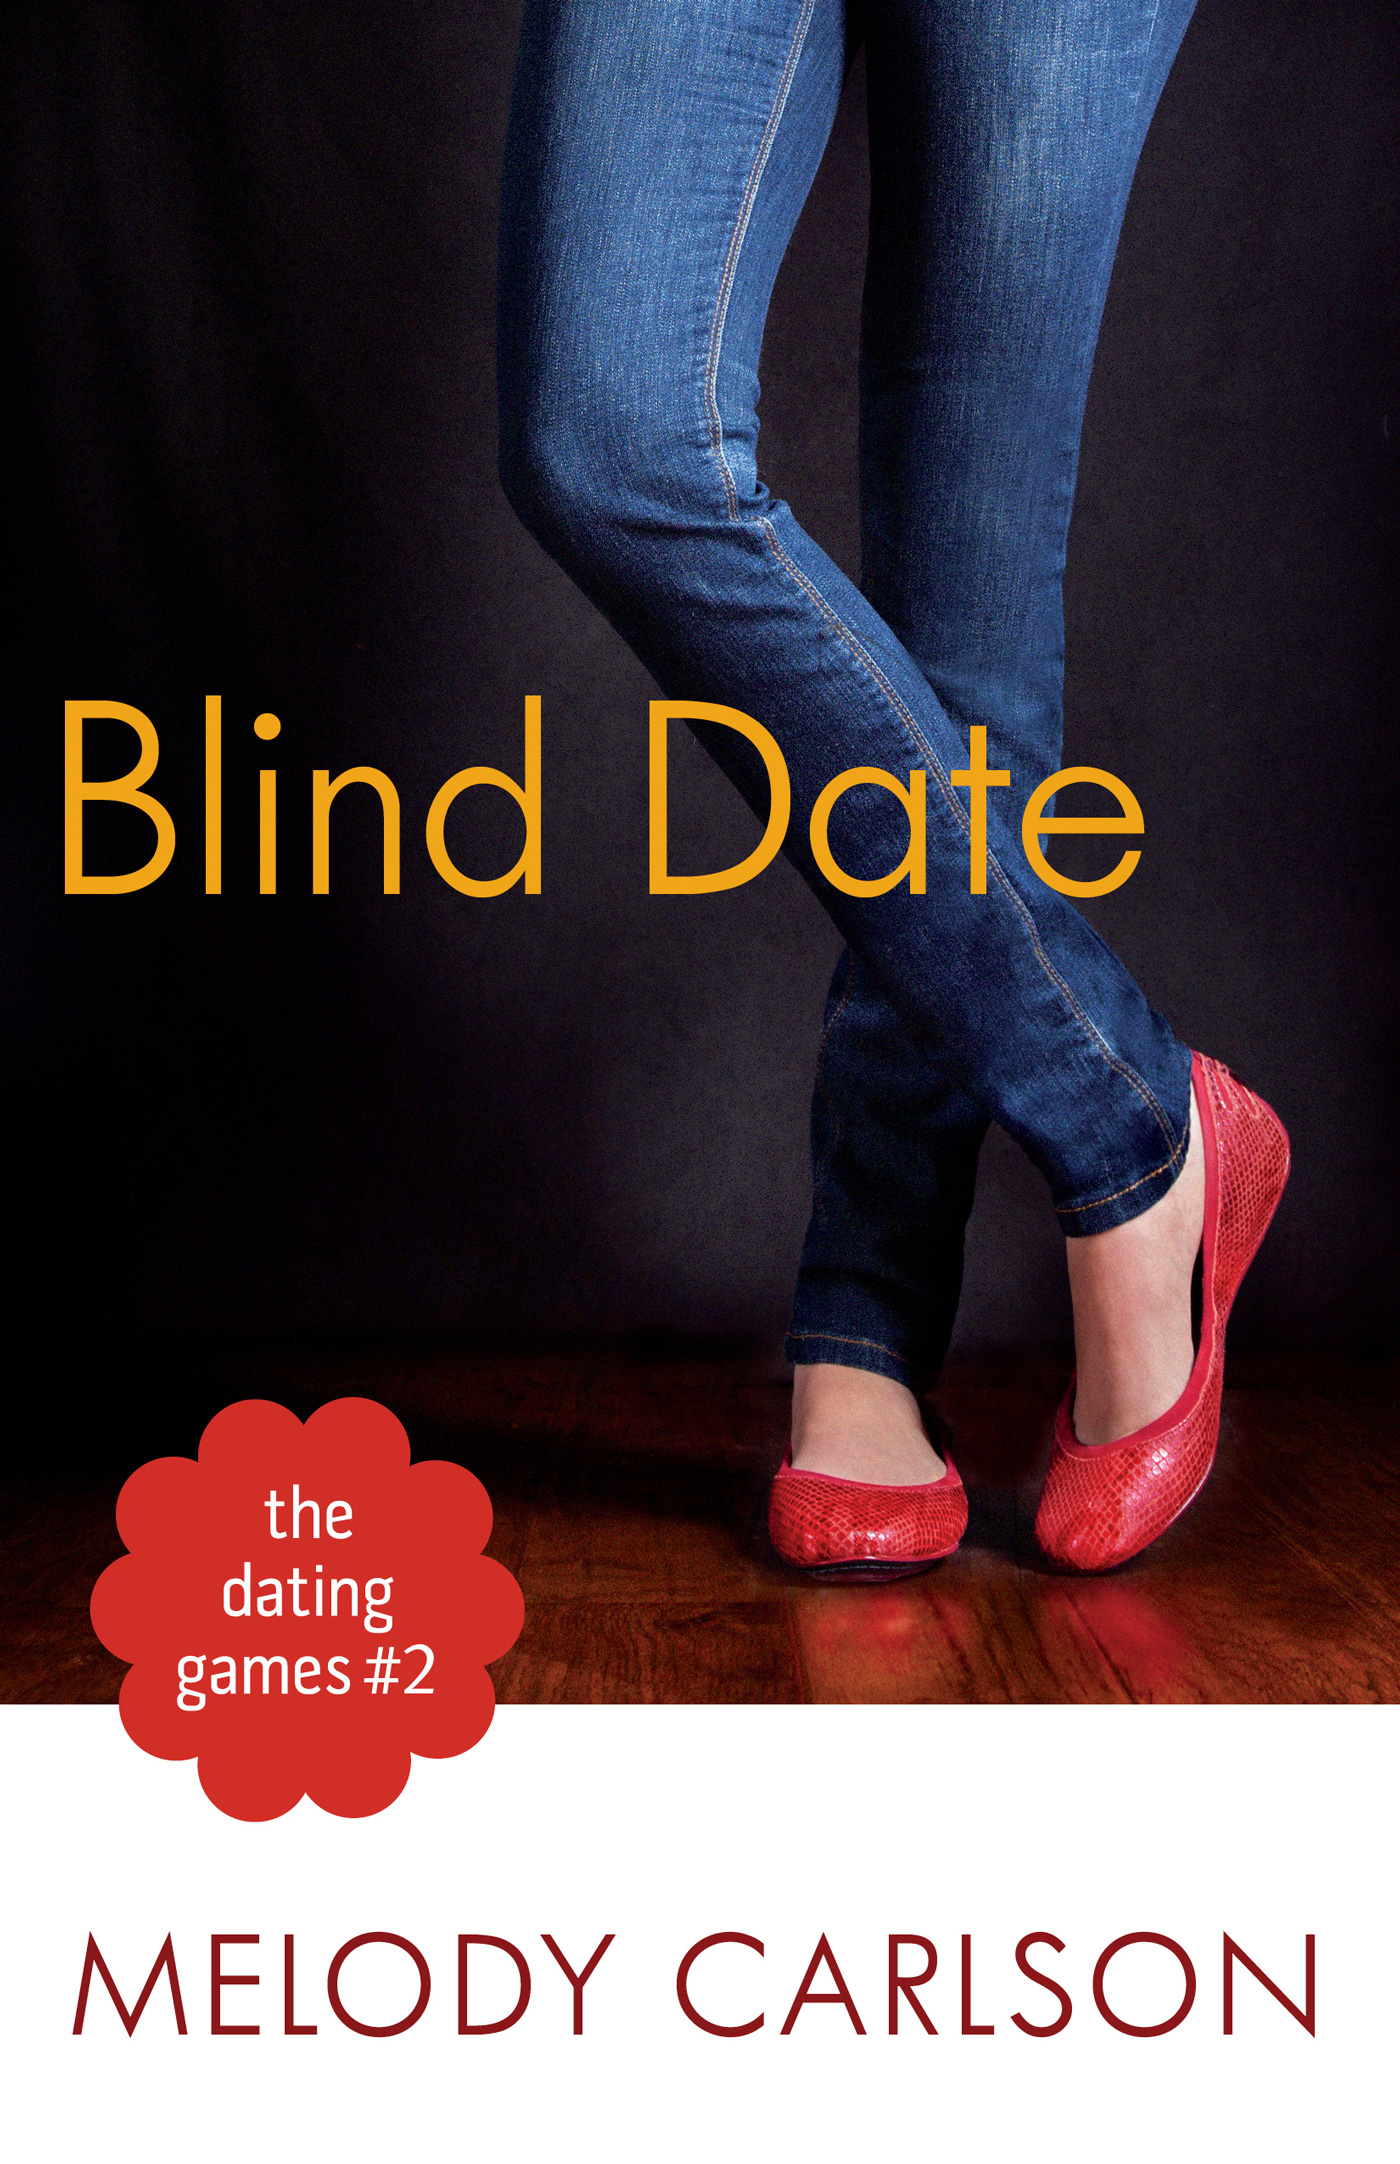 The Blind Date (2014) by Melody Carlson